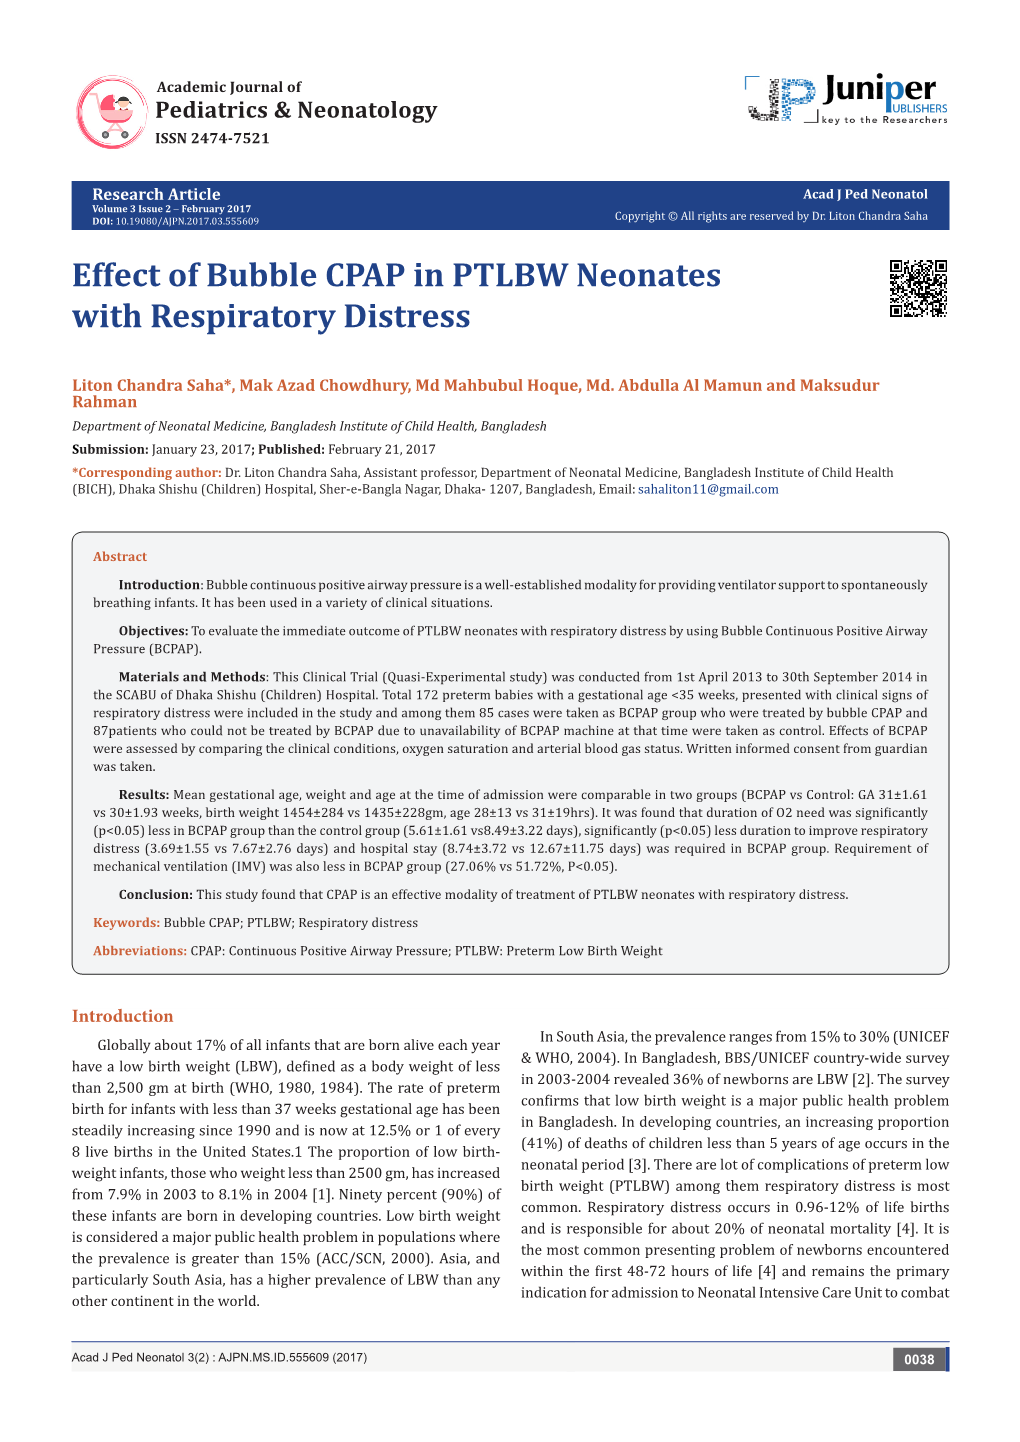 Effect of Bubble CPAP in PTLBW Neonates with Respiratory Distress